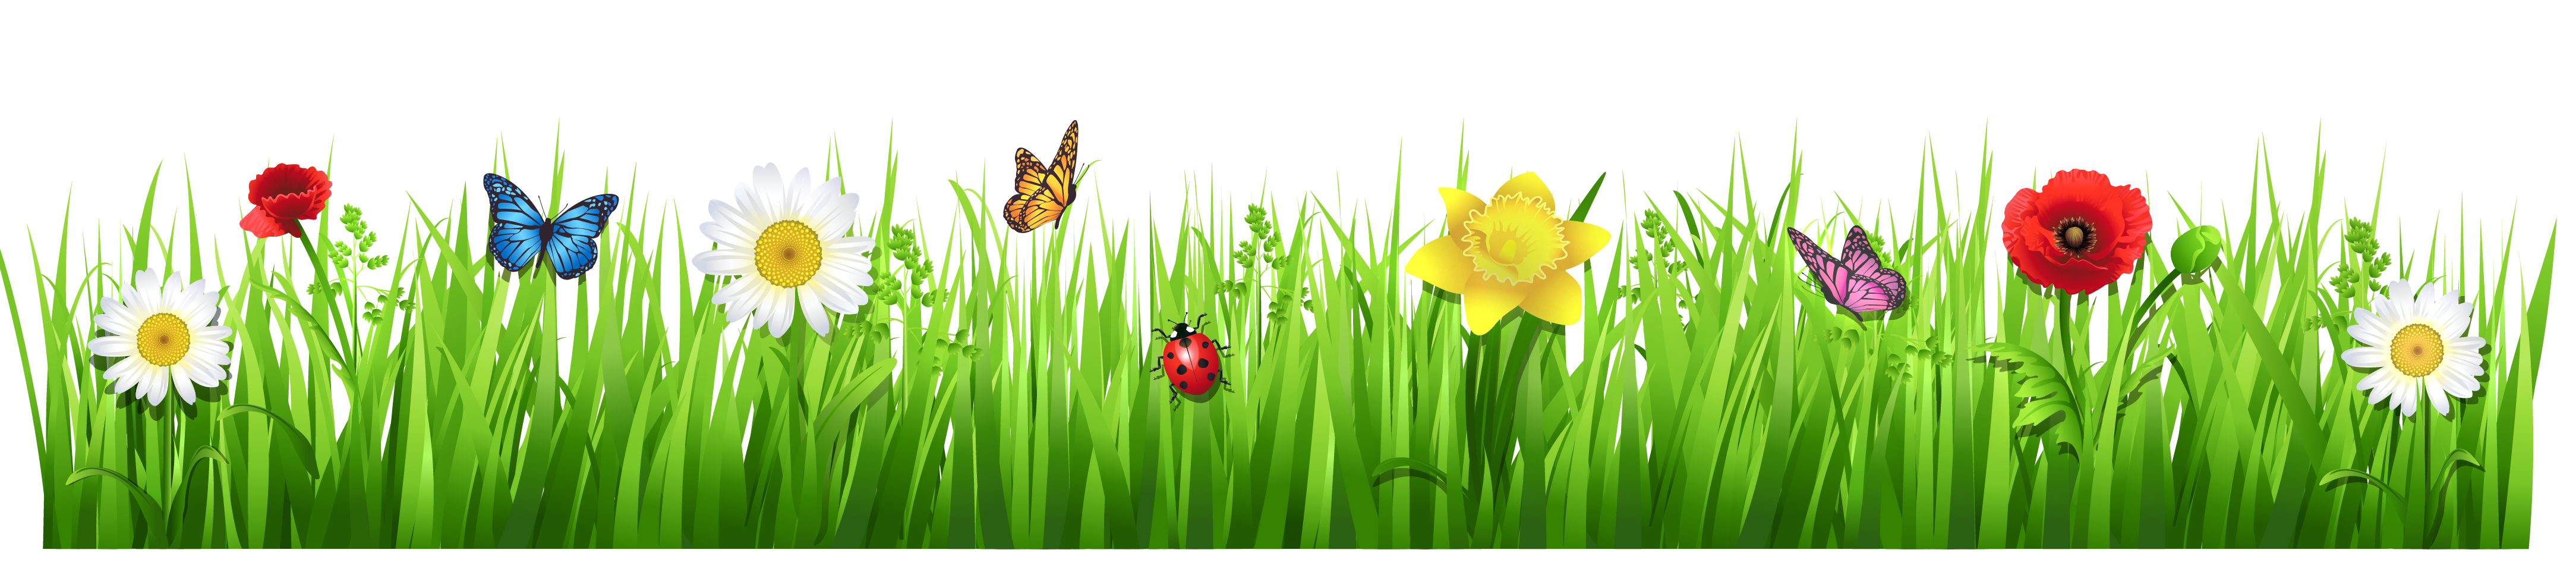 free clipart images spring - photo #49